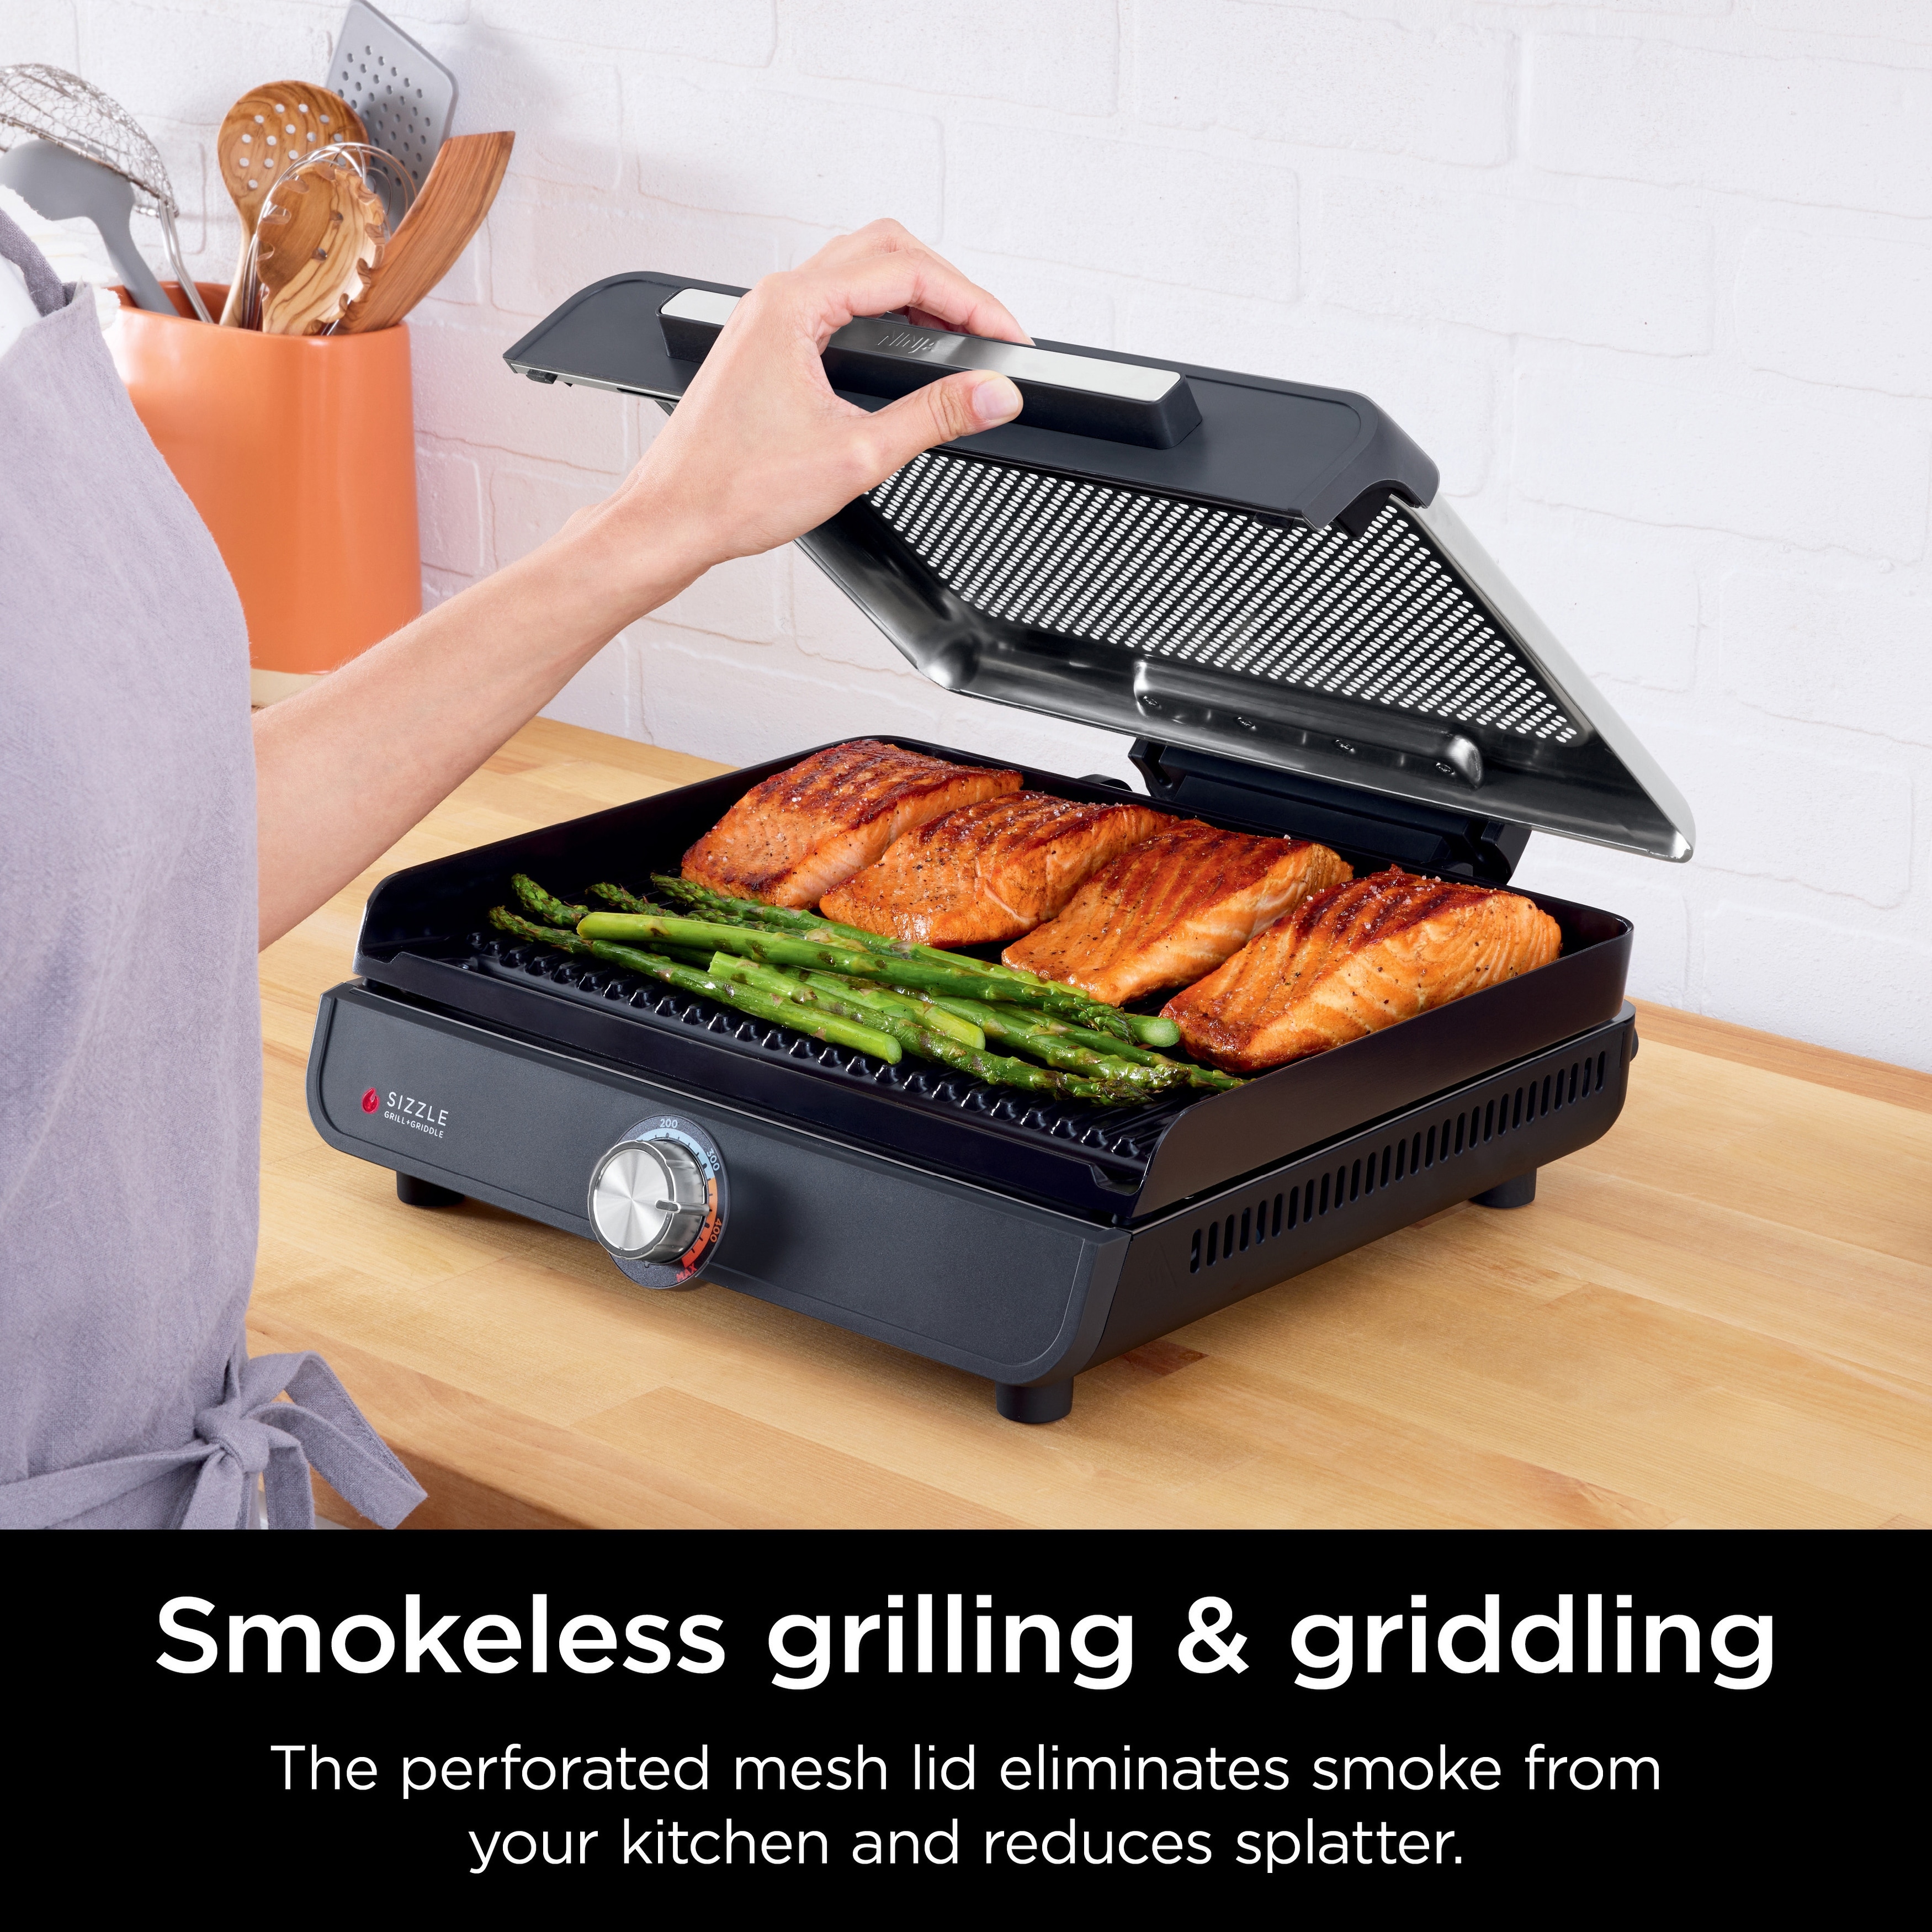 https://ak1.ostkcdn.com/images/products/is/images/direct/74216bb40d8dbc098b892870bc58ee37ada3b02a/Ninja-GR101-Sizzle-Smokeless-Indoor-Grill-%26-Griddle.jpg